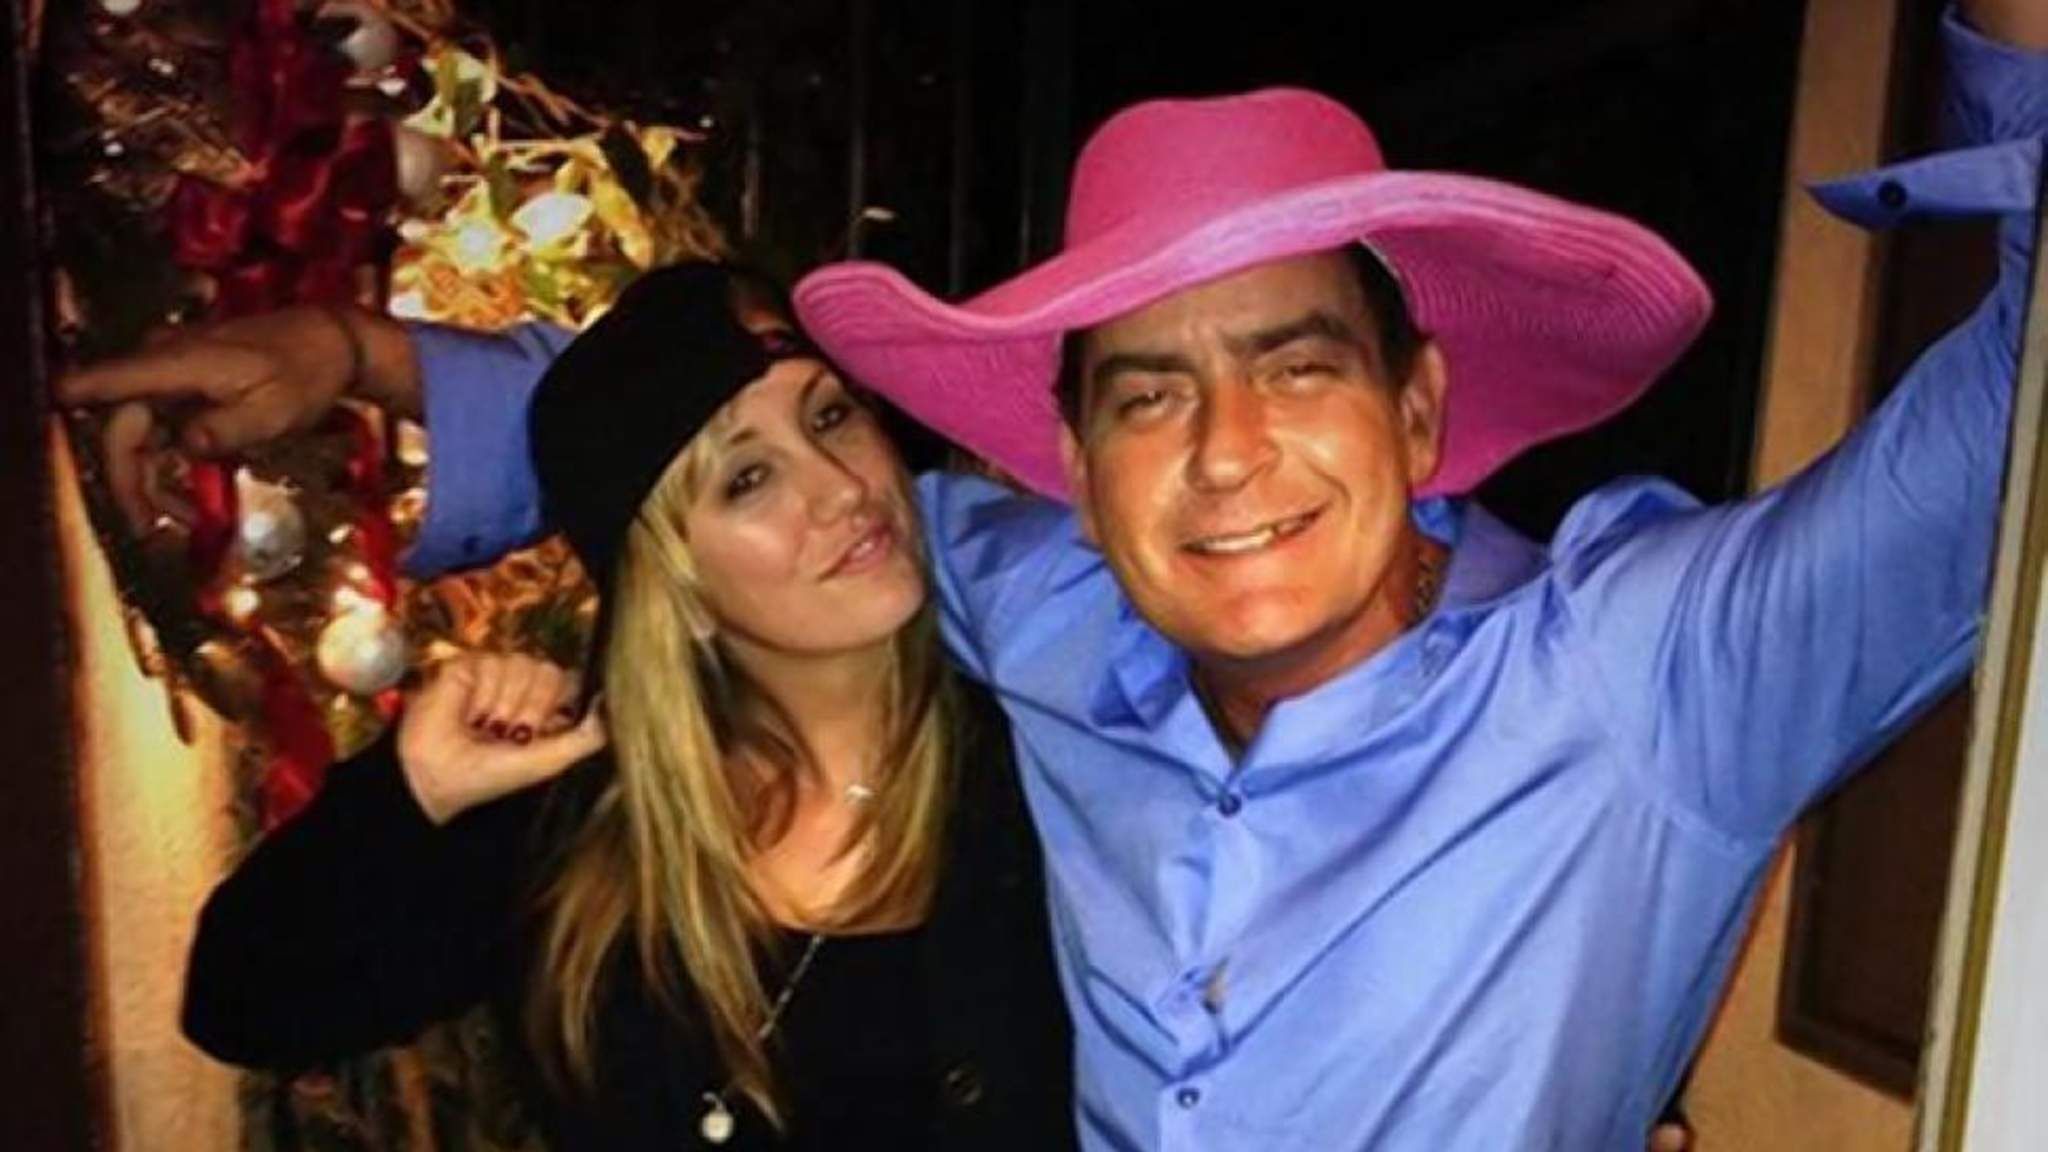 Charlie Sheen Accused Of Threat To Ex-Fiancee US News Sky News picture pic picture